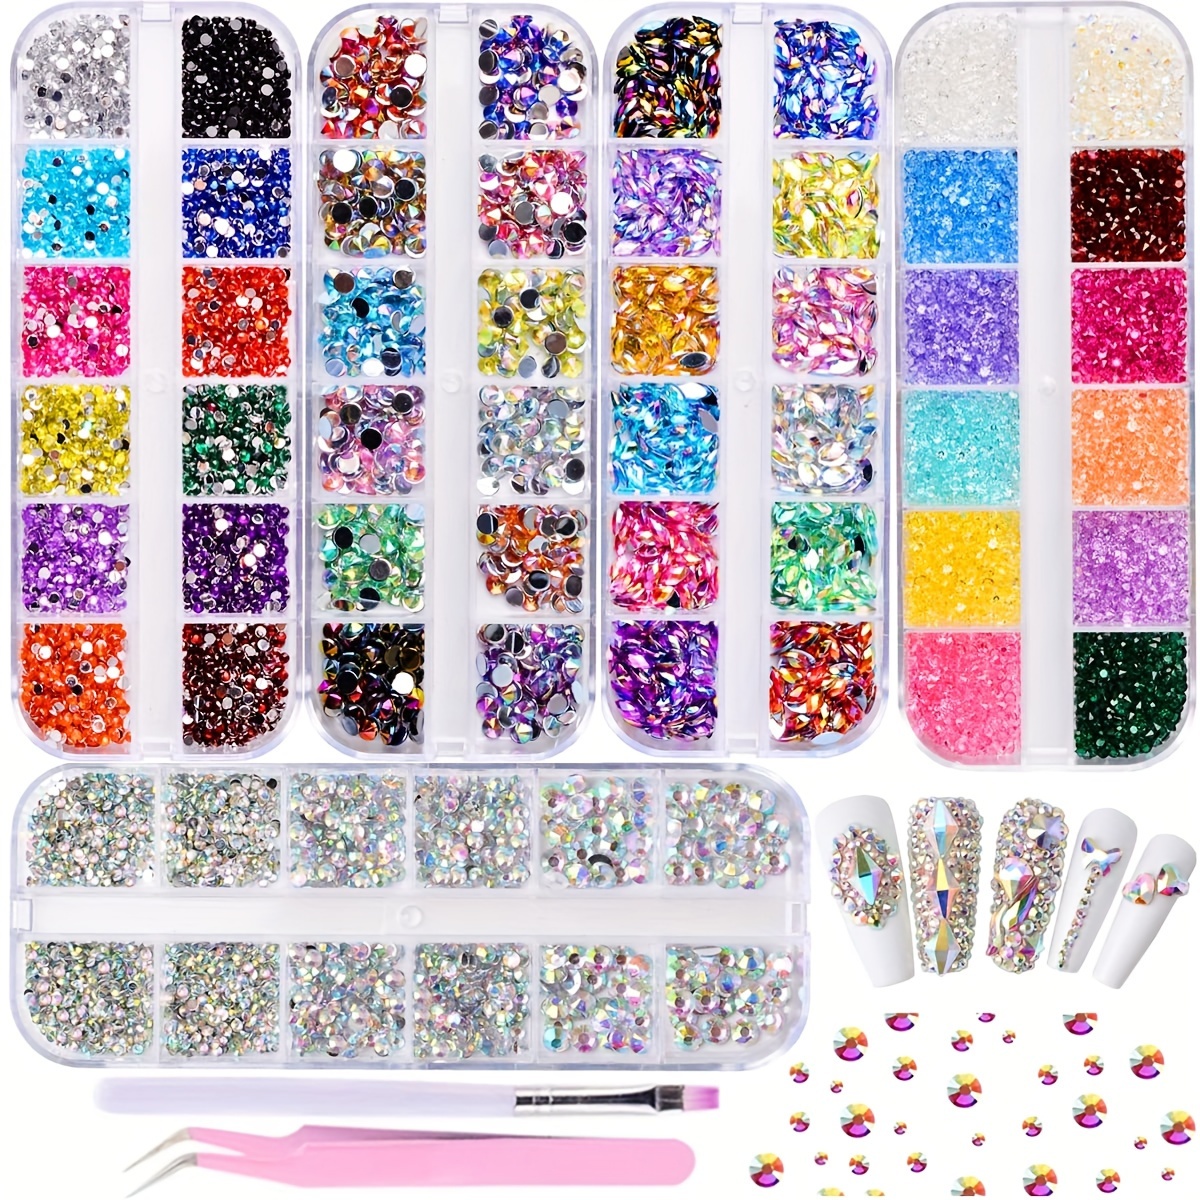 

5 Boxes Shiny Colorful Nail Art Rhinestones Multicolor Nail Crystal Gems Stone Kit With Curved Tweezers And A Nail Brush